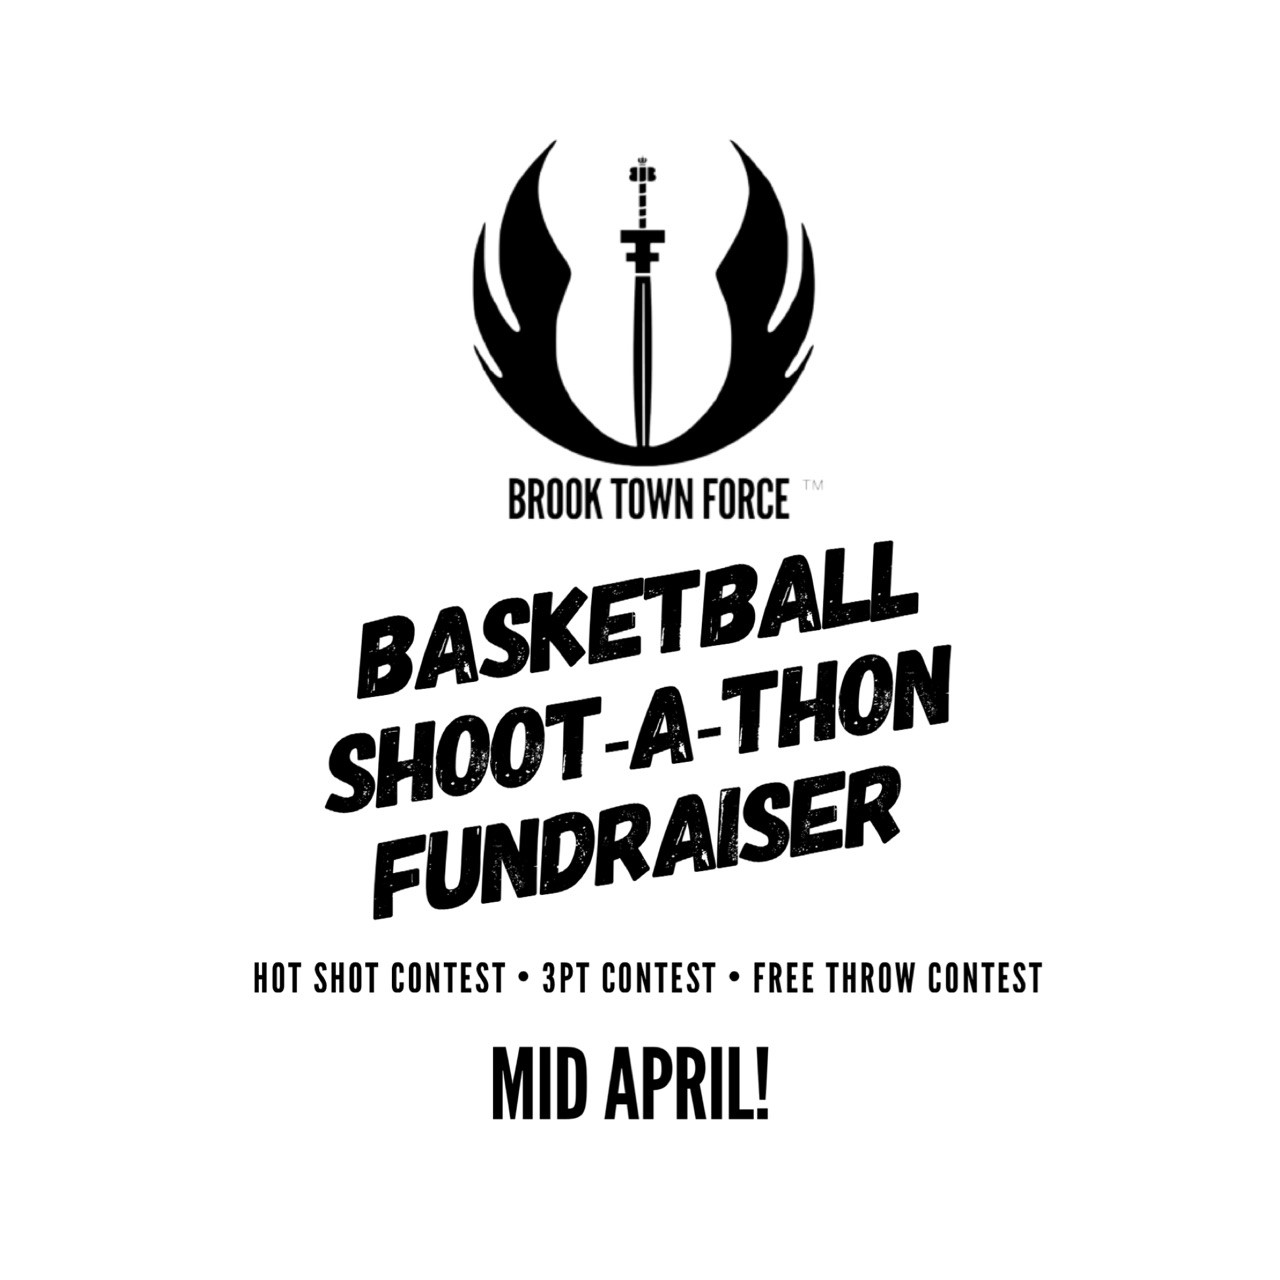 BASKETBALL SHOOT-A-THON FUNDRAISER  on Apr 13, 19:30@Frontier Park Field House - Buy tickets and Get information on BTMS LLC 